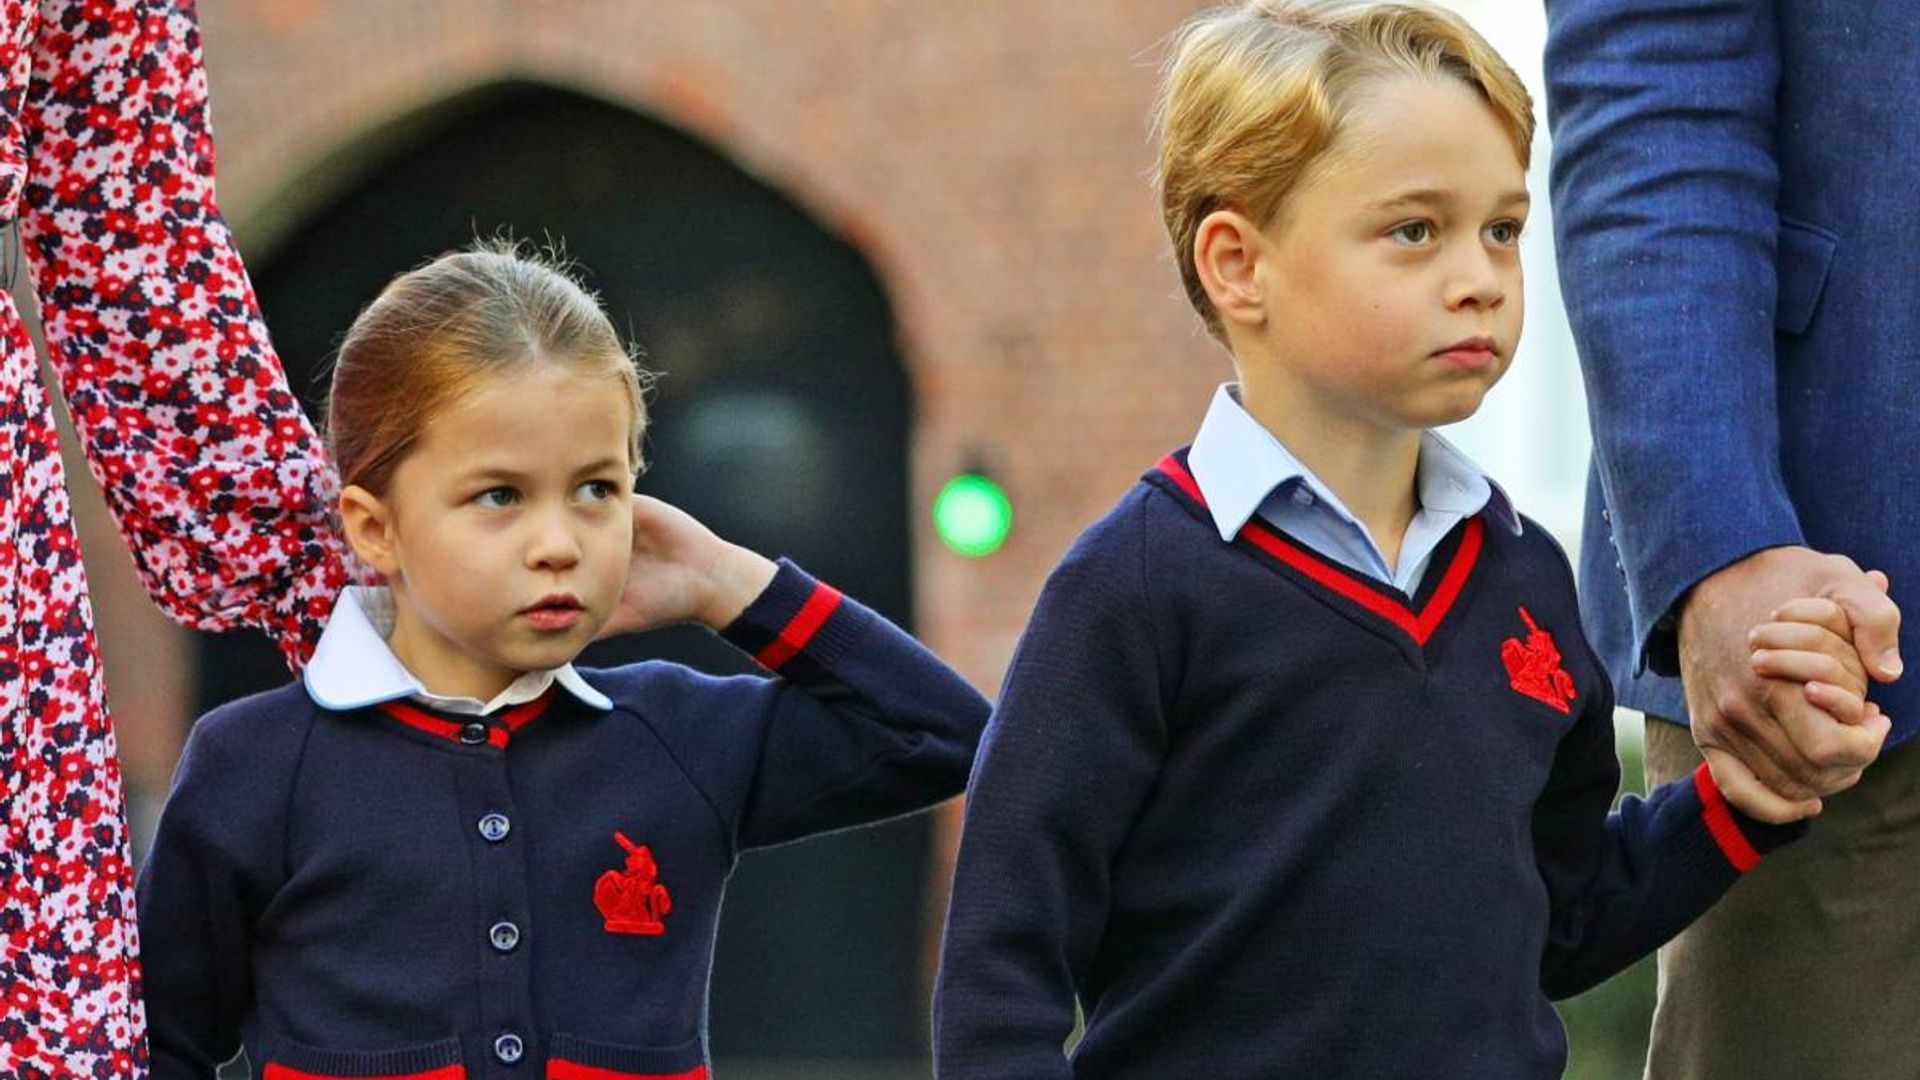 prince william defends princess charlotte from george